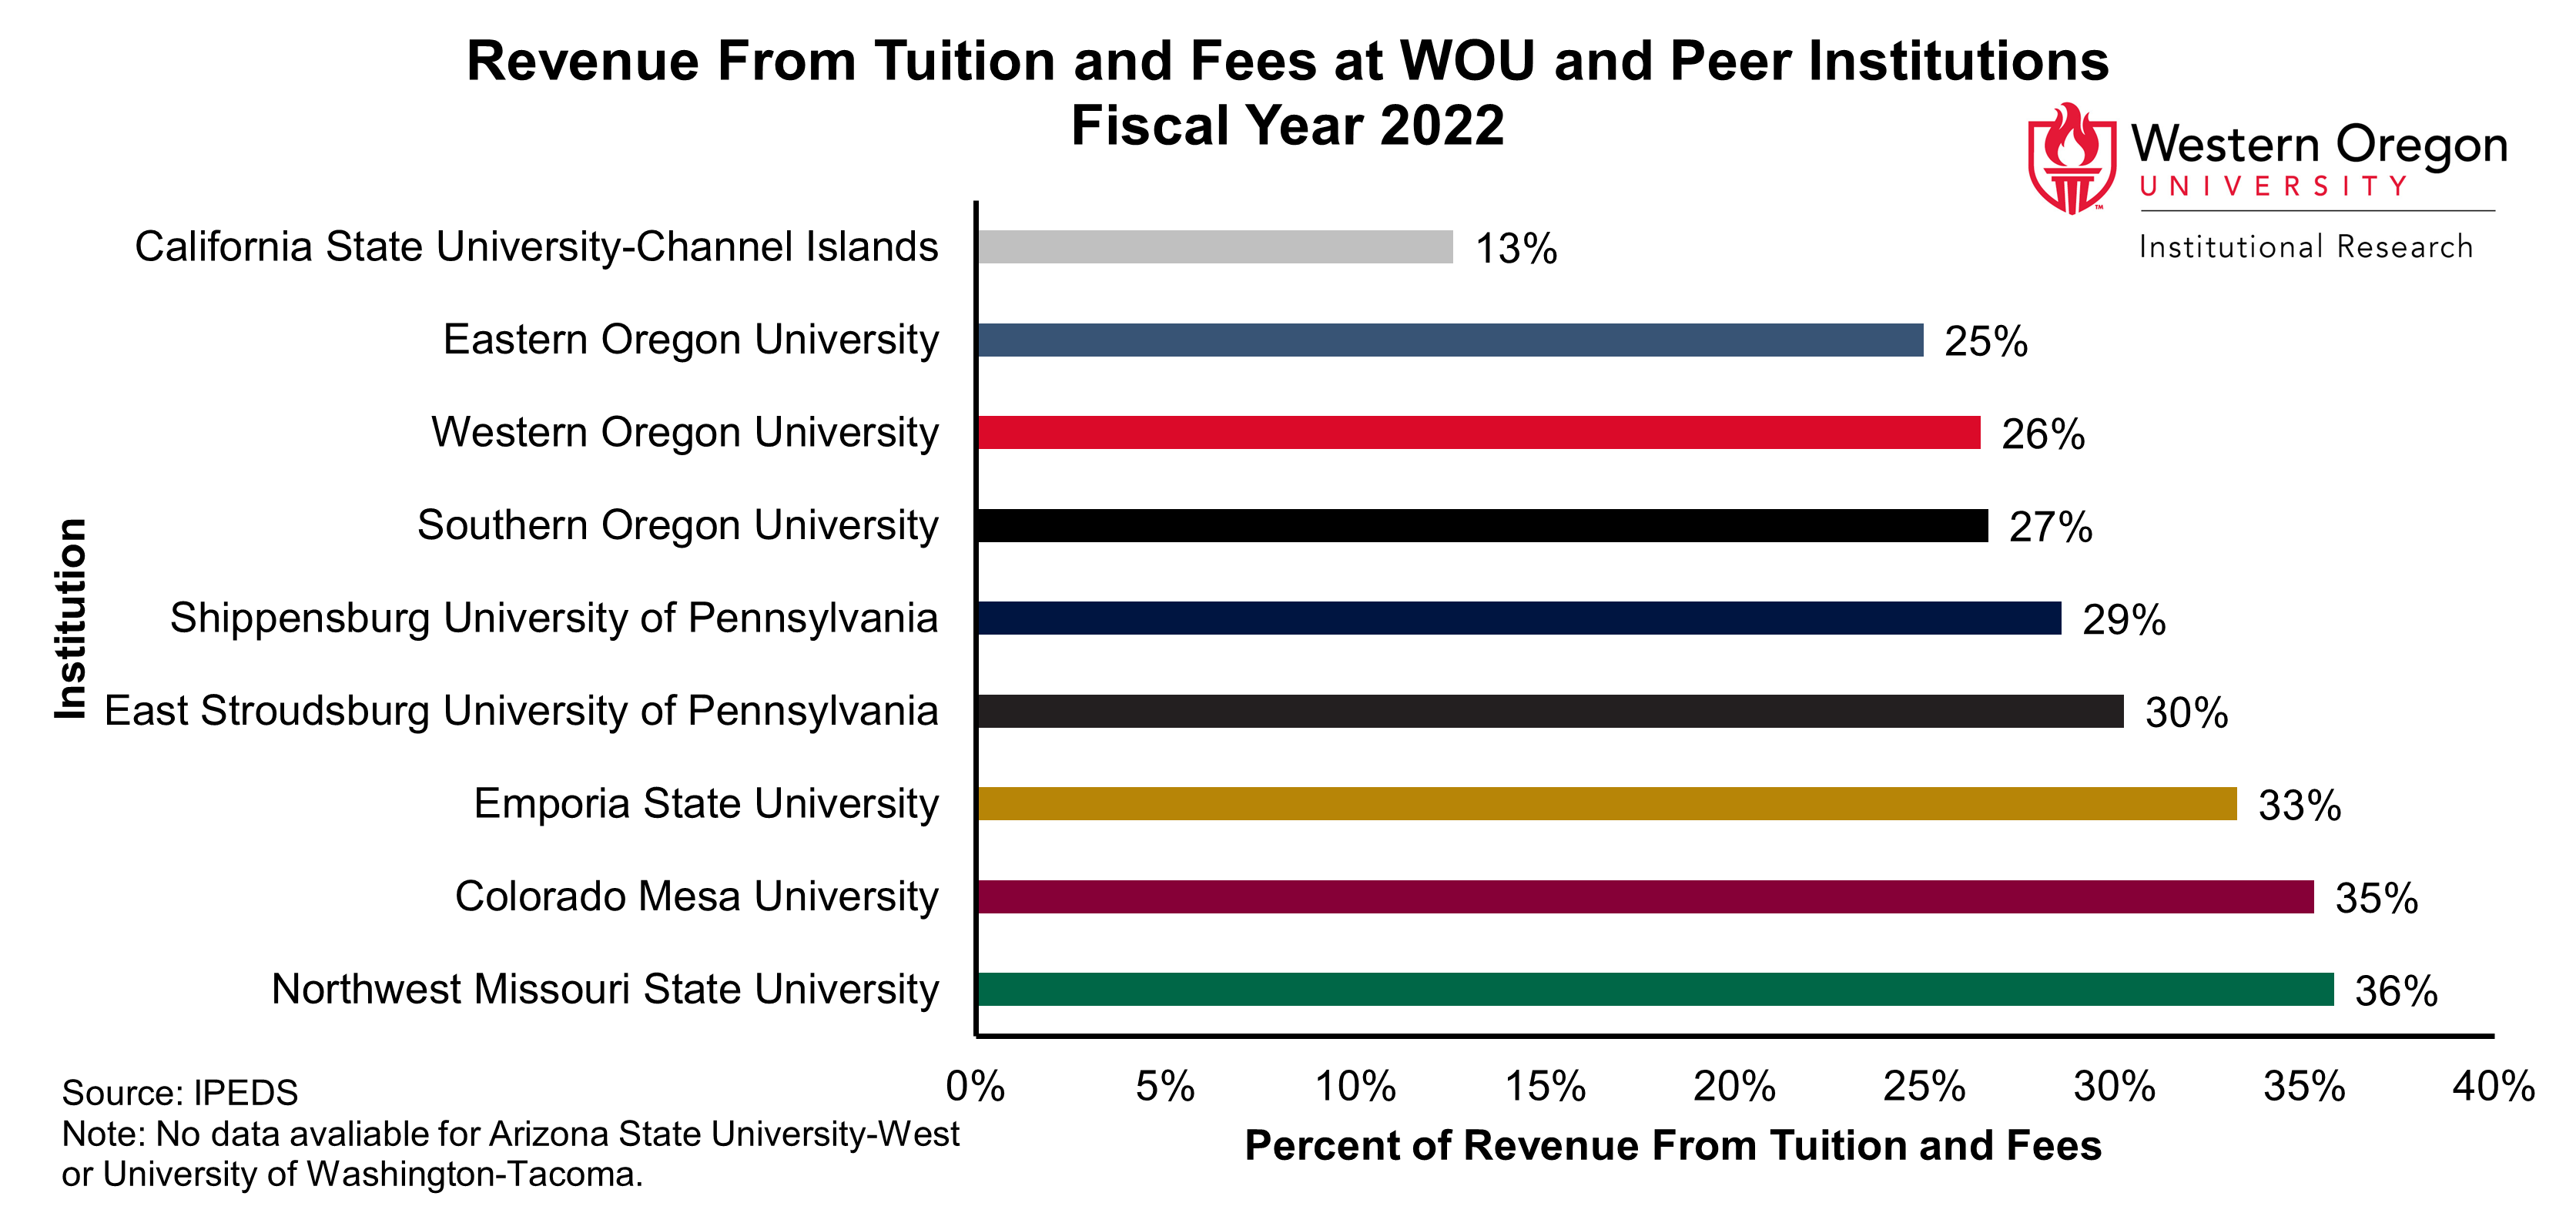 Bar graph of the percentage of revenue from tuition and fees for WOU and peer universities in fiscal year 2022, showing percentages that range from 13% to 36% with WOU's at 26%